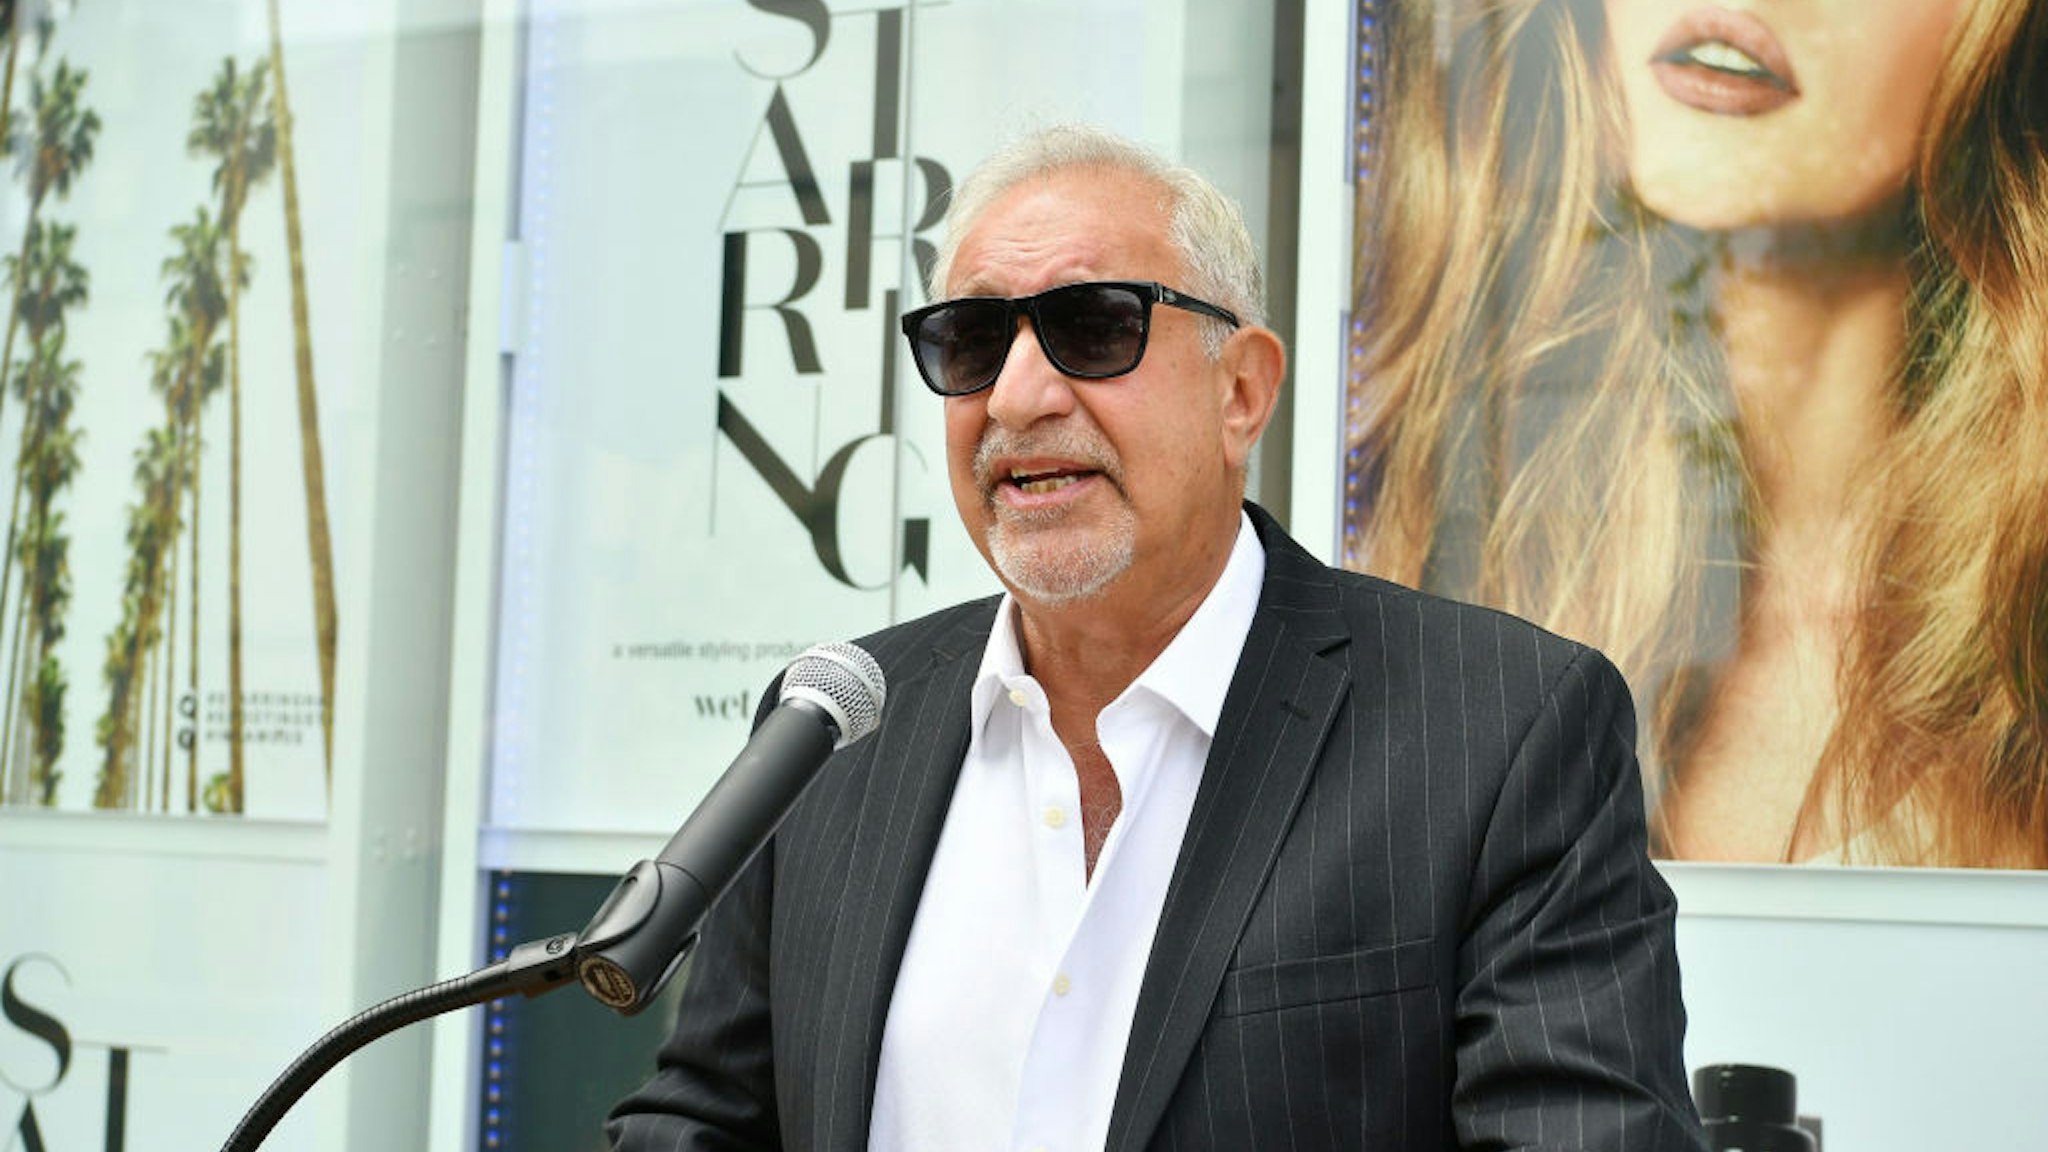 Mark Geragos, Civil Rights Attorney and Trial Lawyer speaks at the opening of STARRING by Ted Gibson Salon on August 17, 2020 in Los Angeles, California.